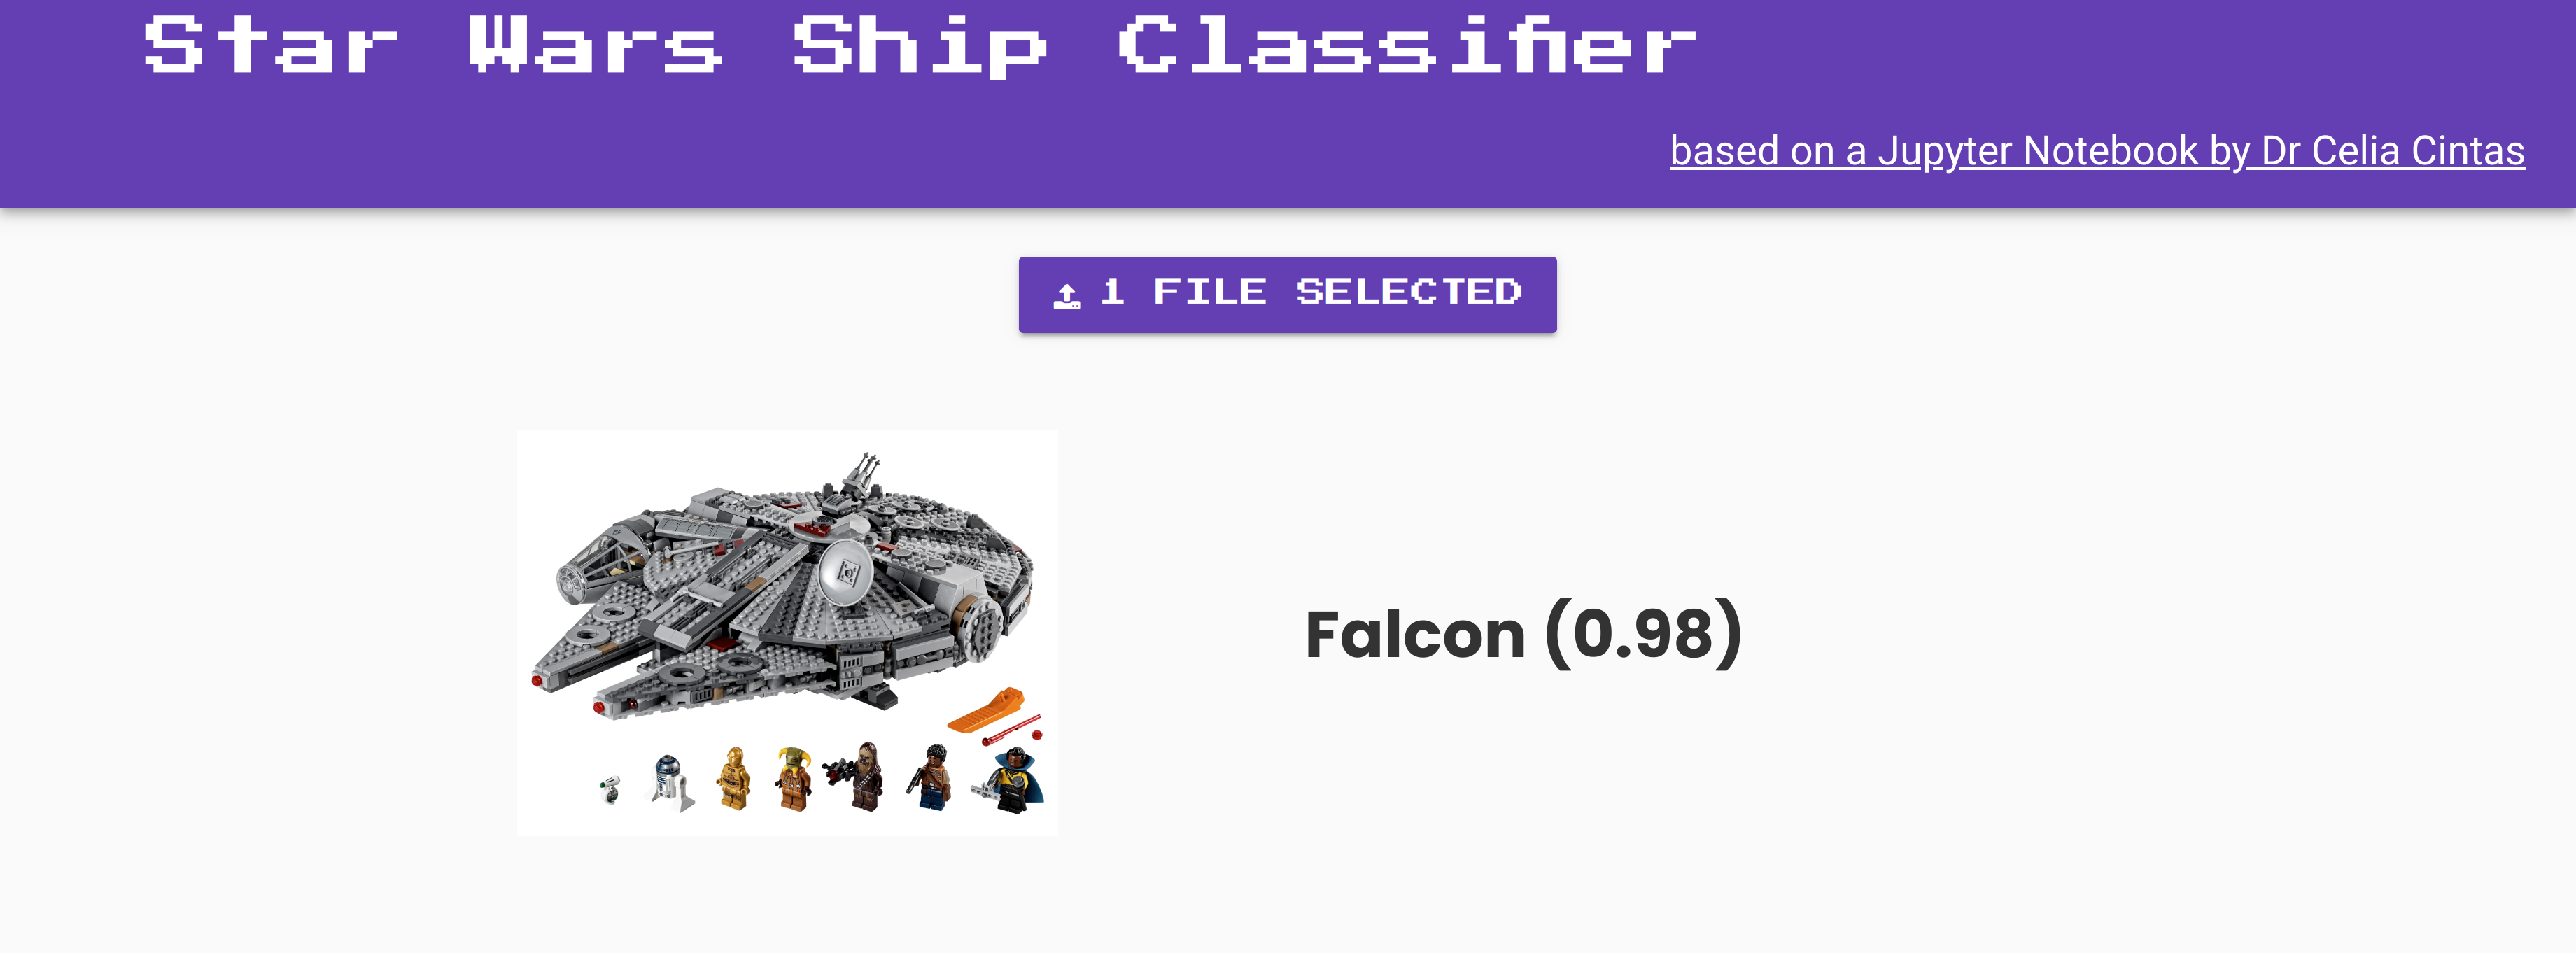 The classifier in action! Correctly identifying a Lego Millenium Falcon.